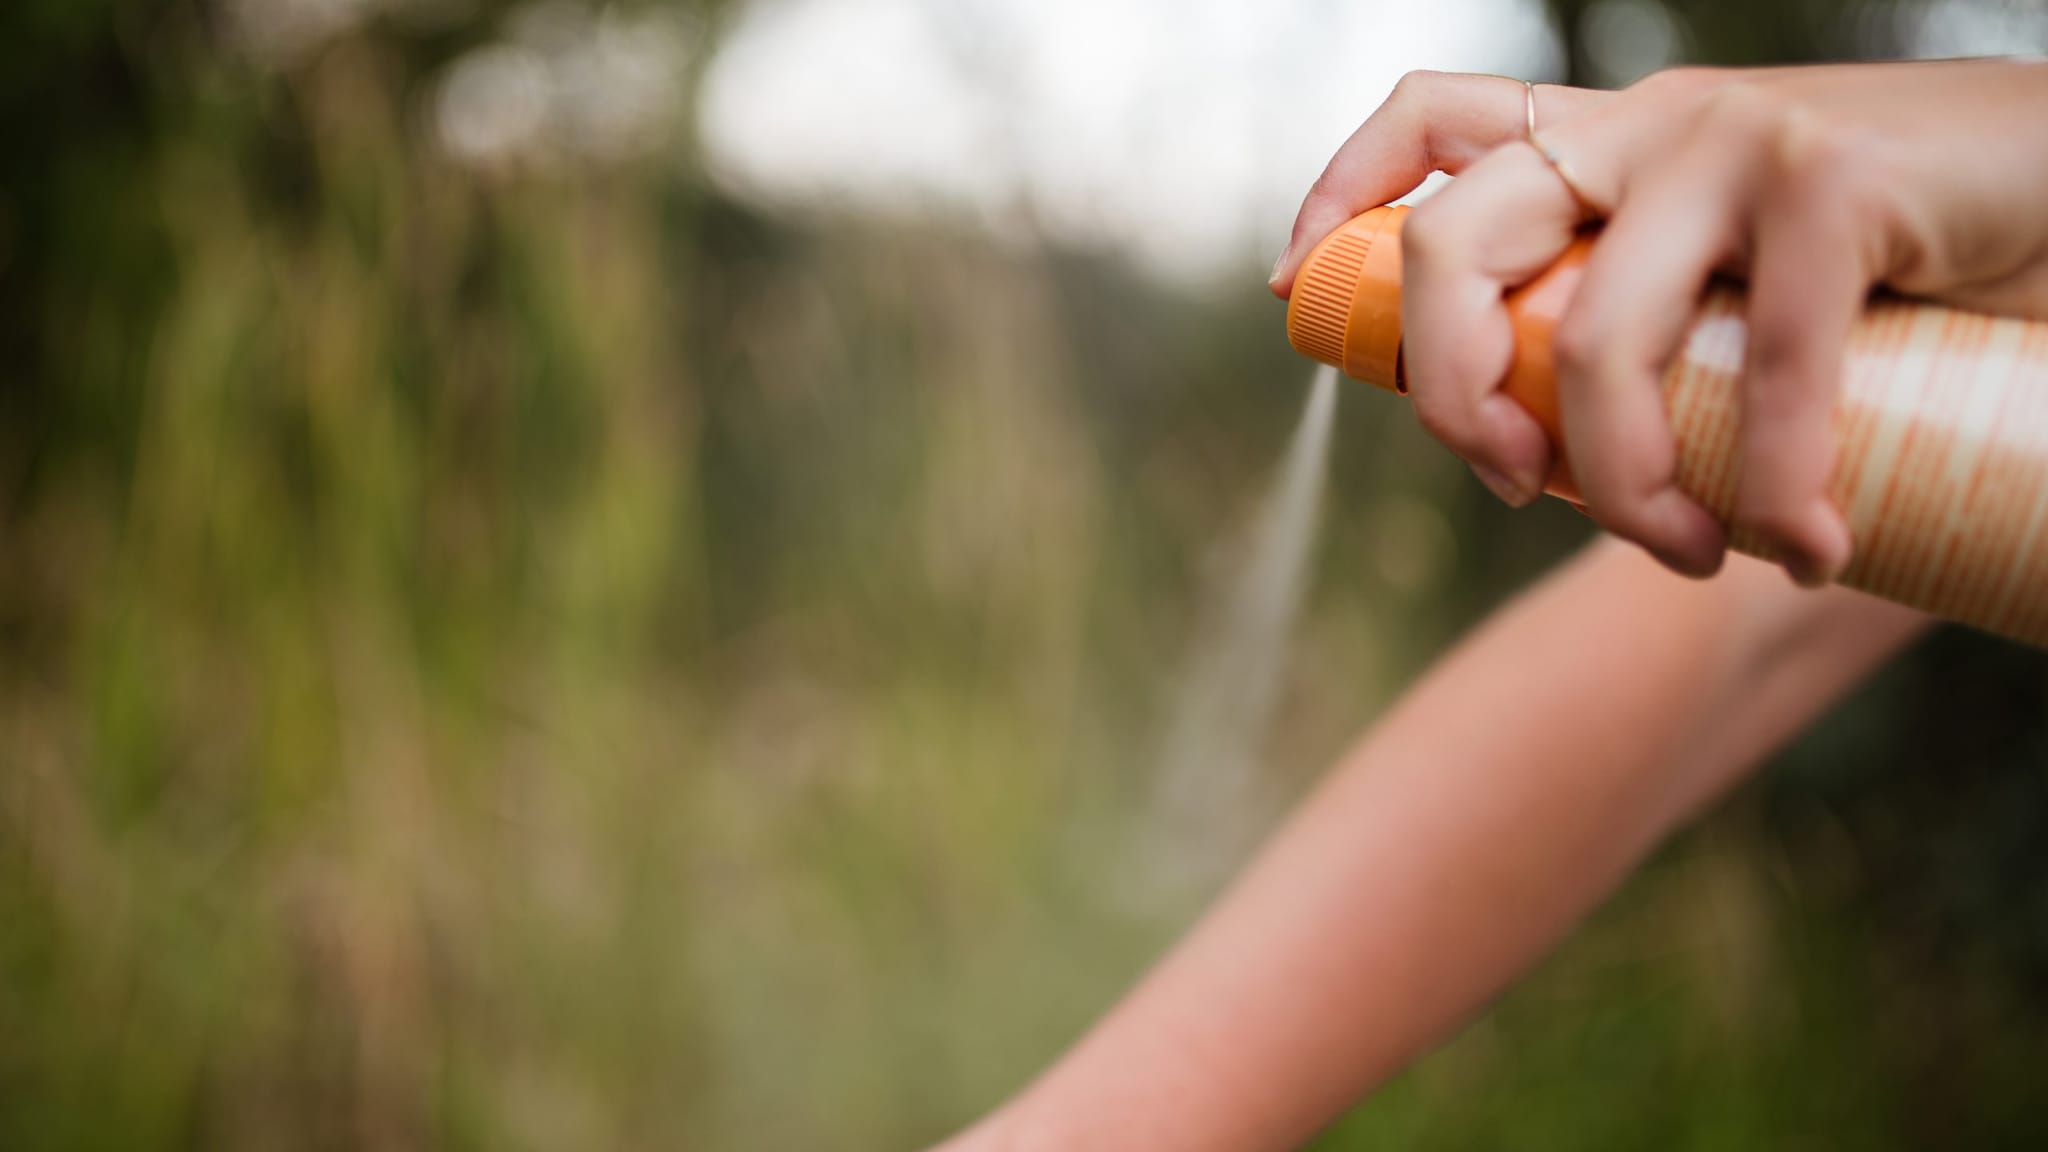 Insect repellent being sprayed on a person's arm.